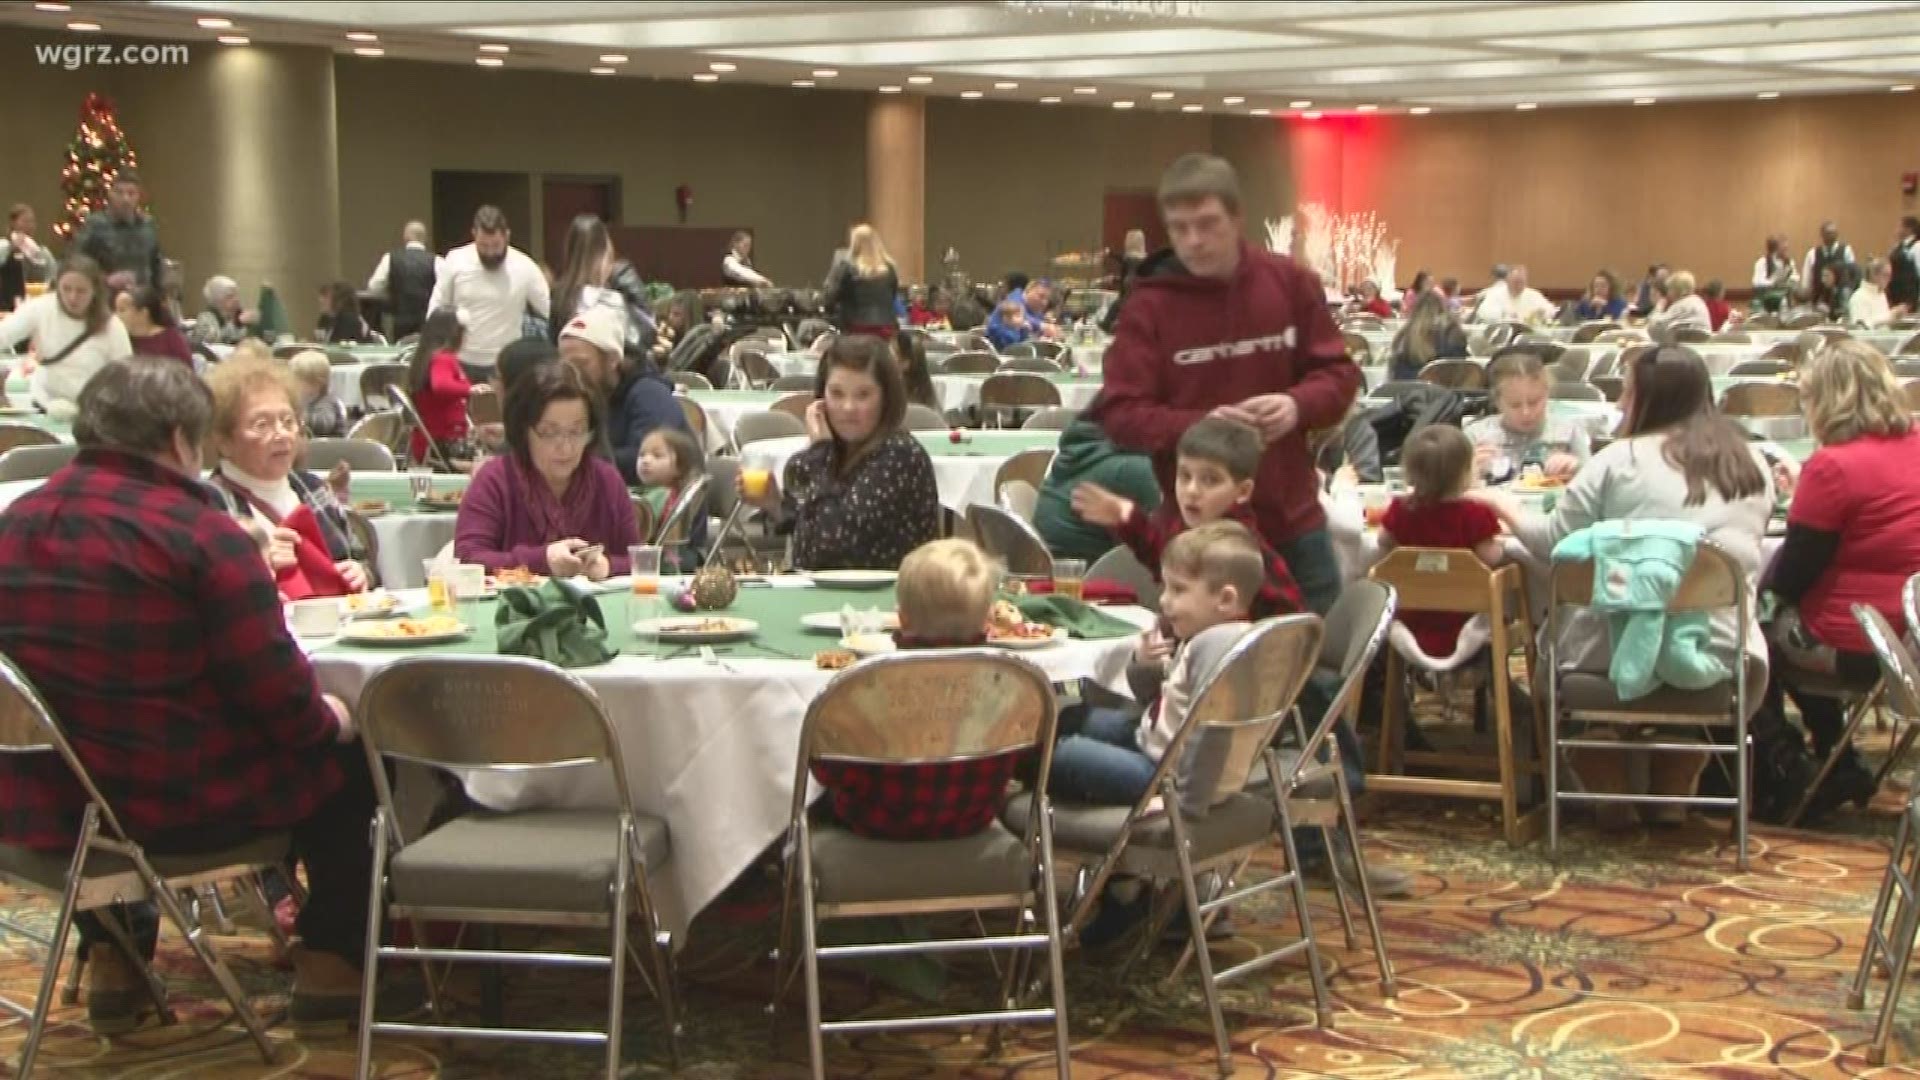 The Convention Center was open for families to look at the trees, have some holiday fun with Christmas crafts, cookie decorating, and time with Santa!